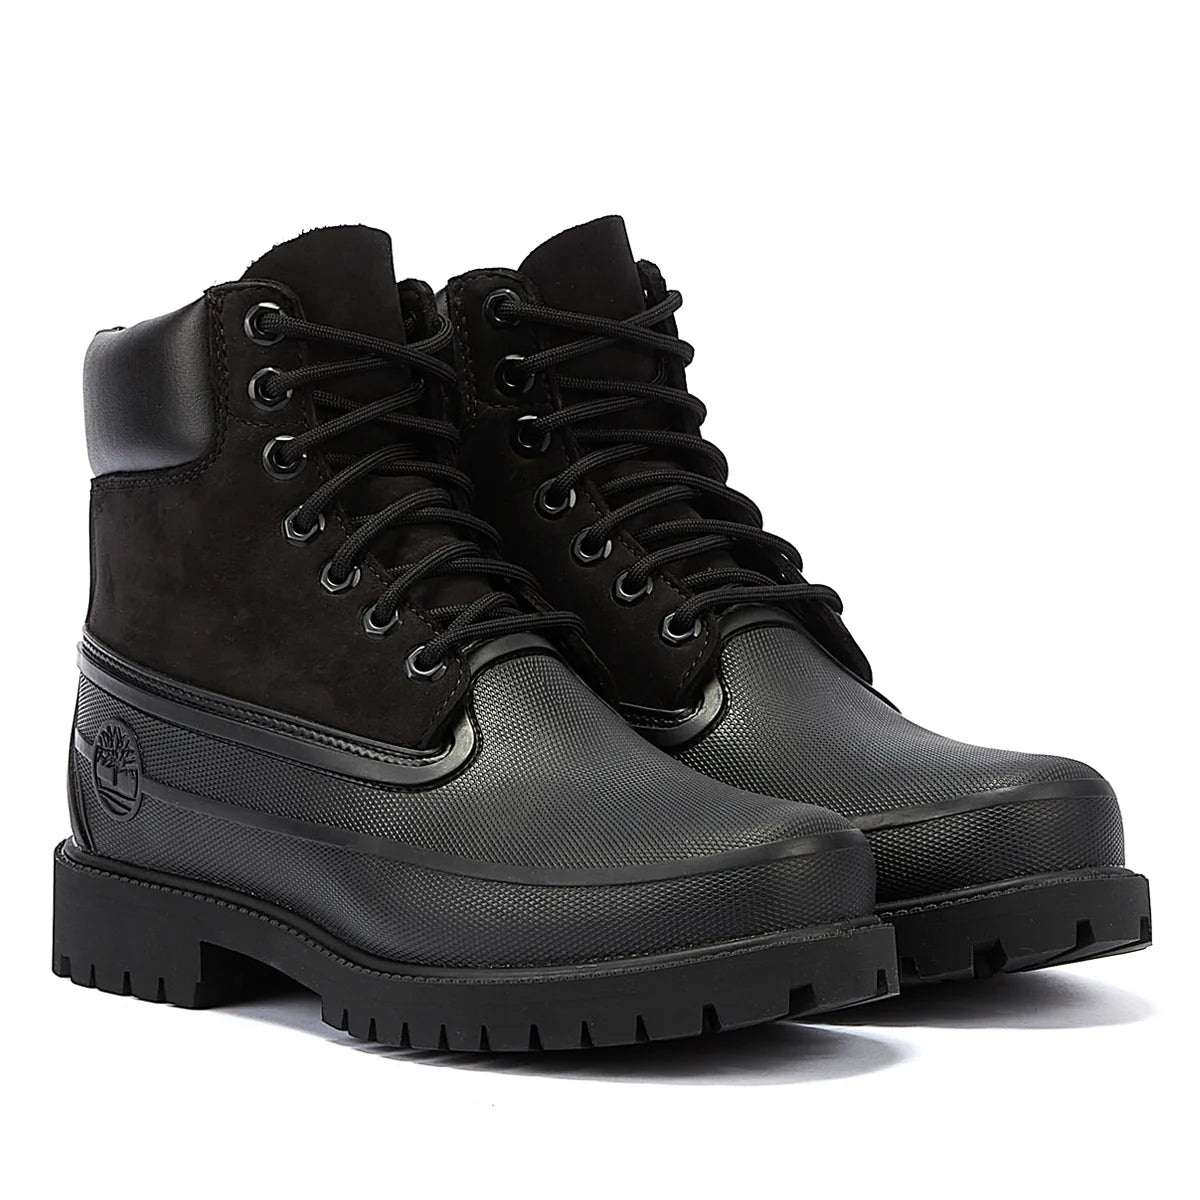 Timberland 6 Inch Rubber Men’s Black Boots